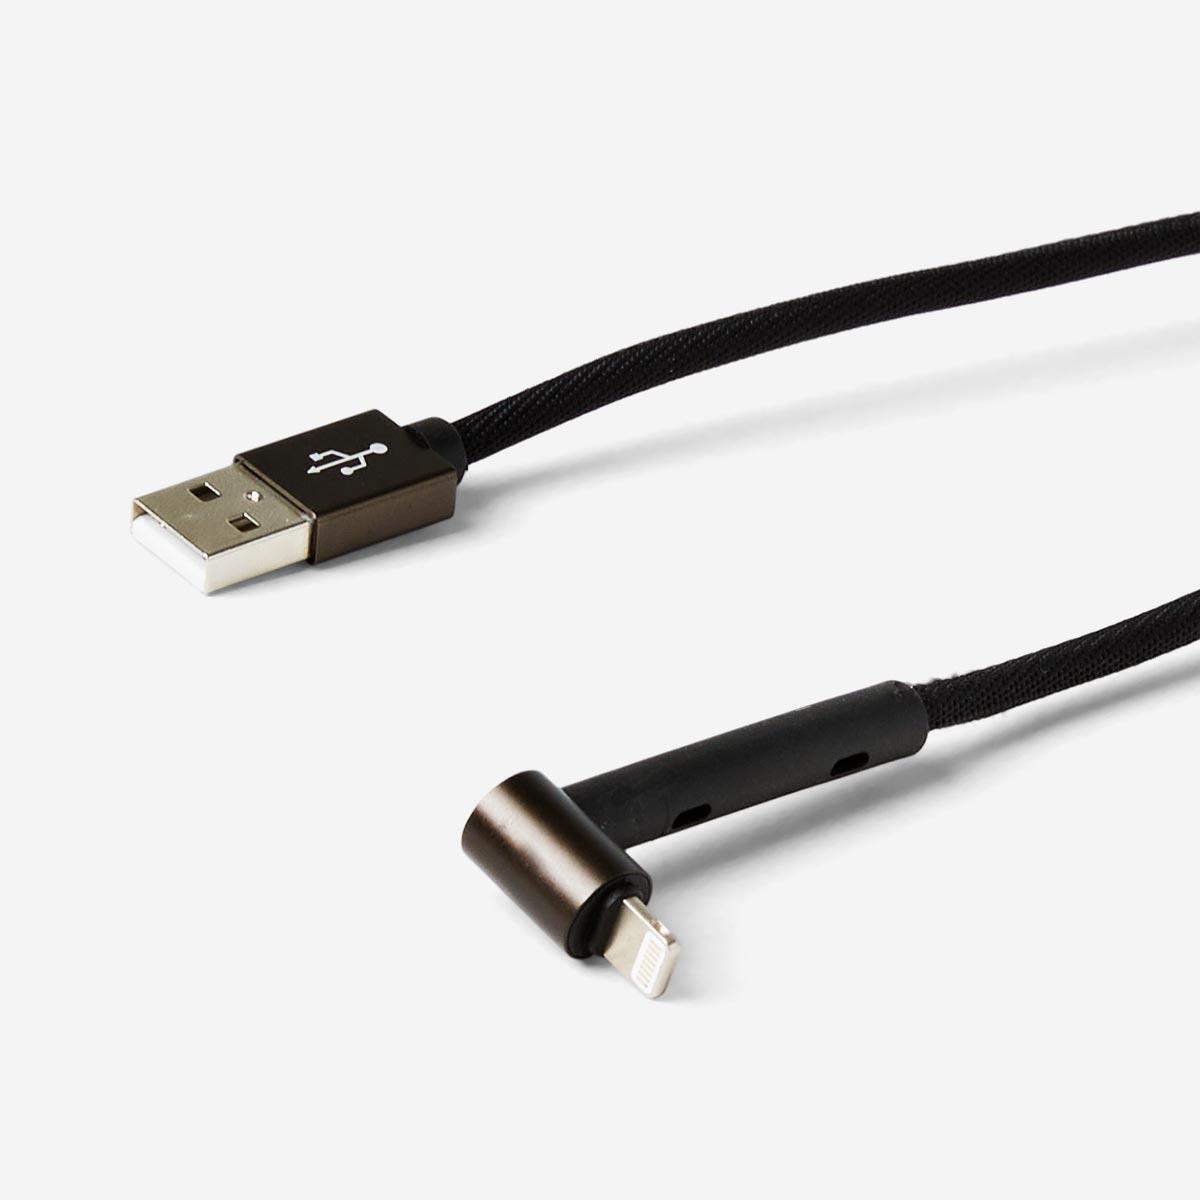 Black multi-charging cable